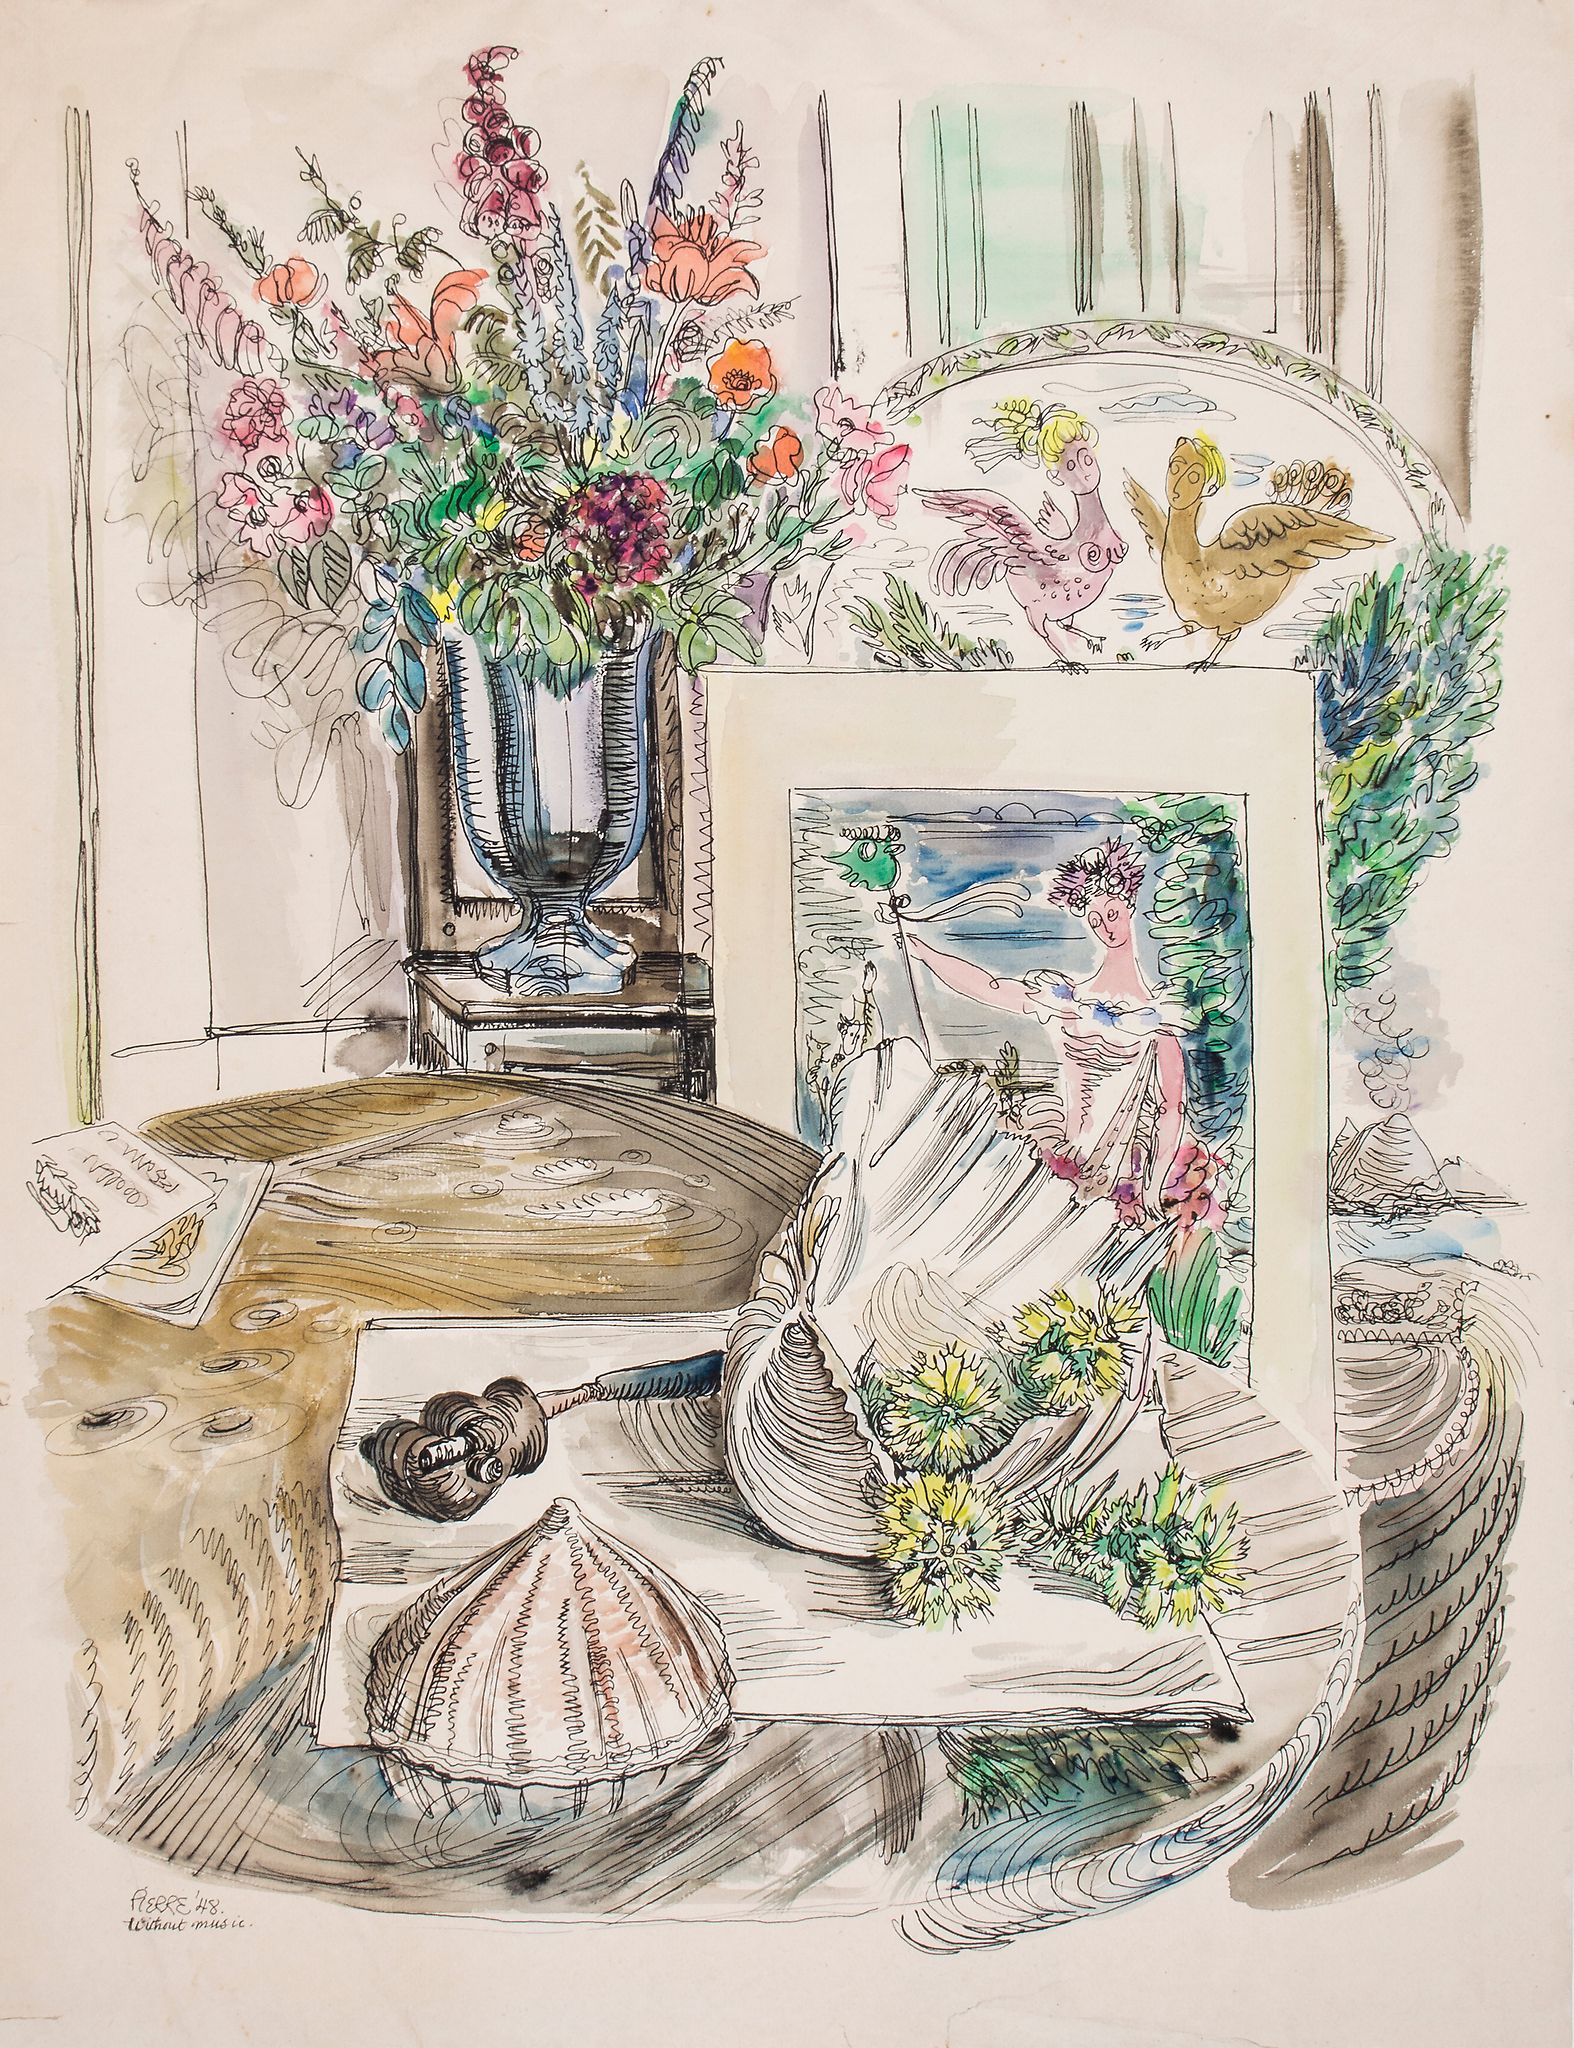 Peter Samuelson (1912-1996) - Without Music; An interior with still life of flowers, and with a